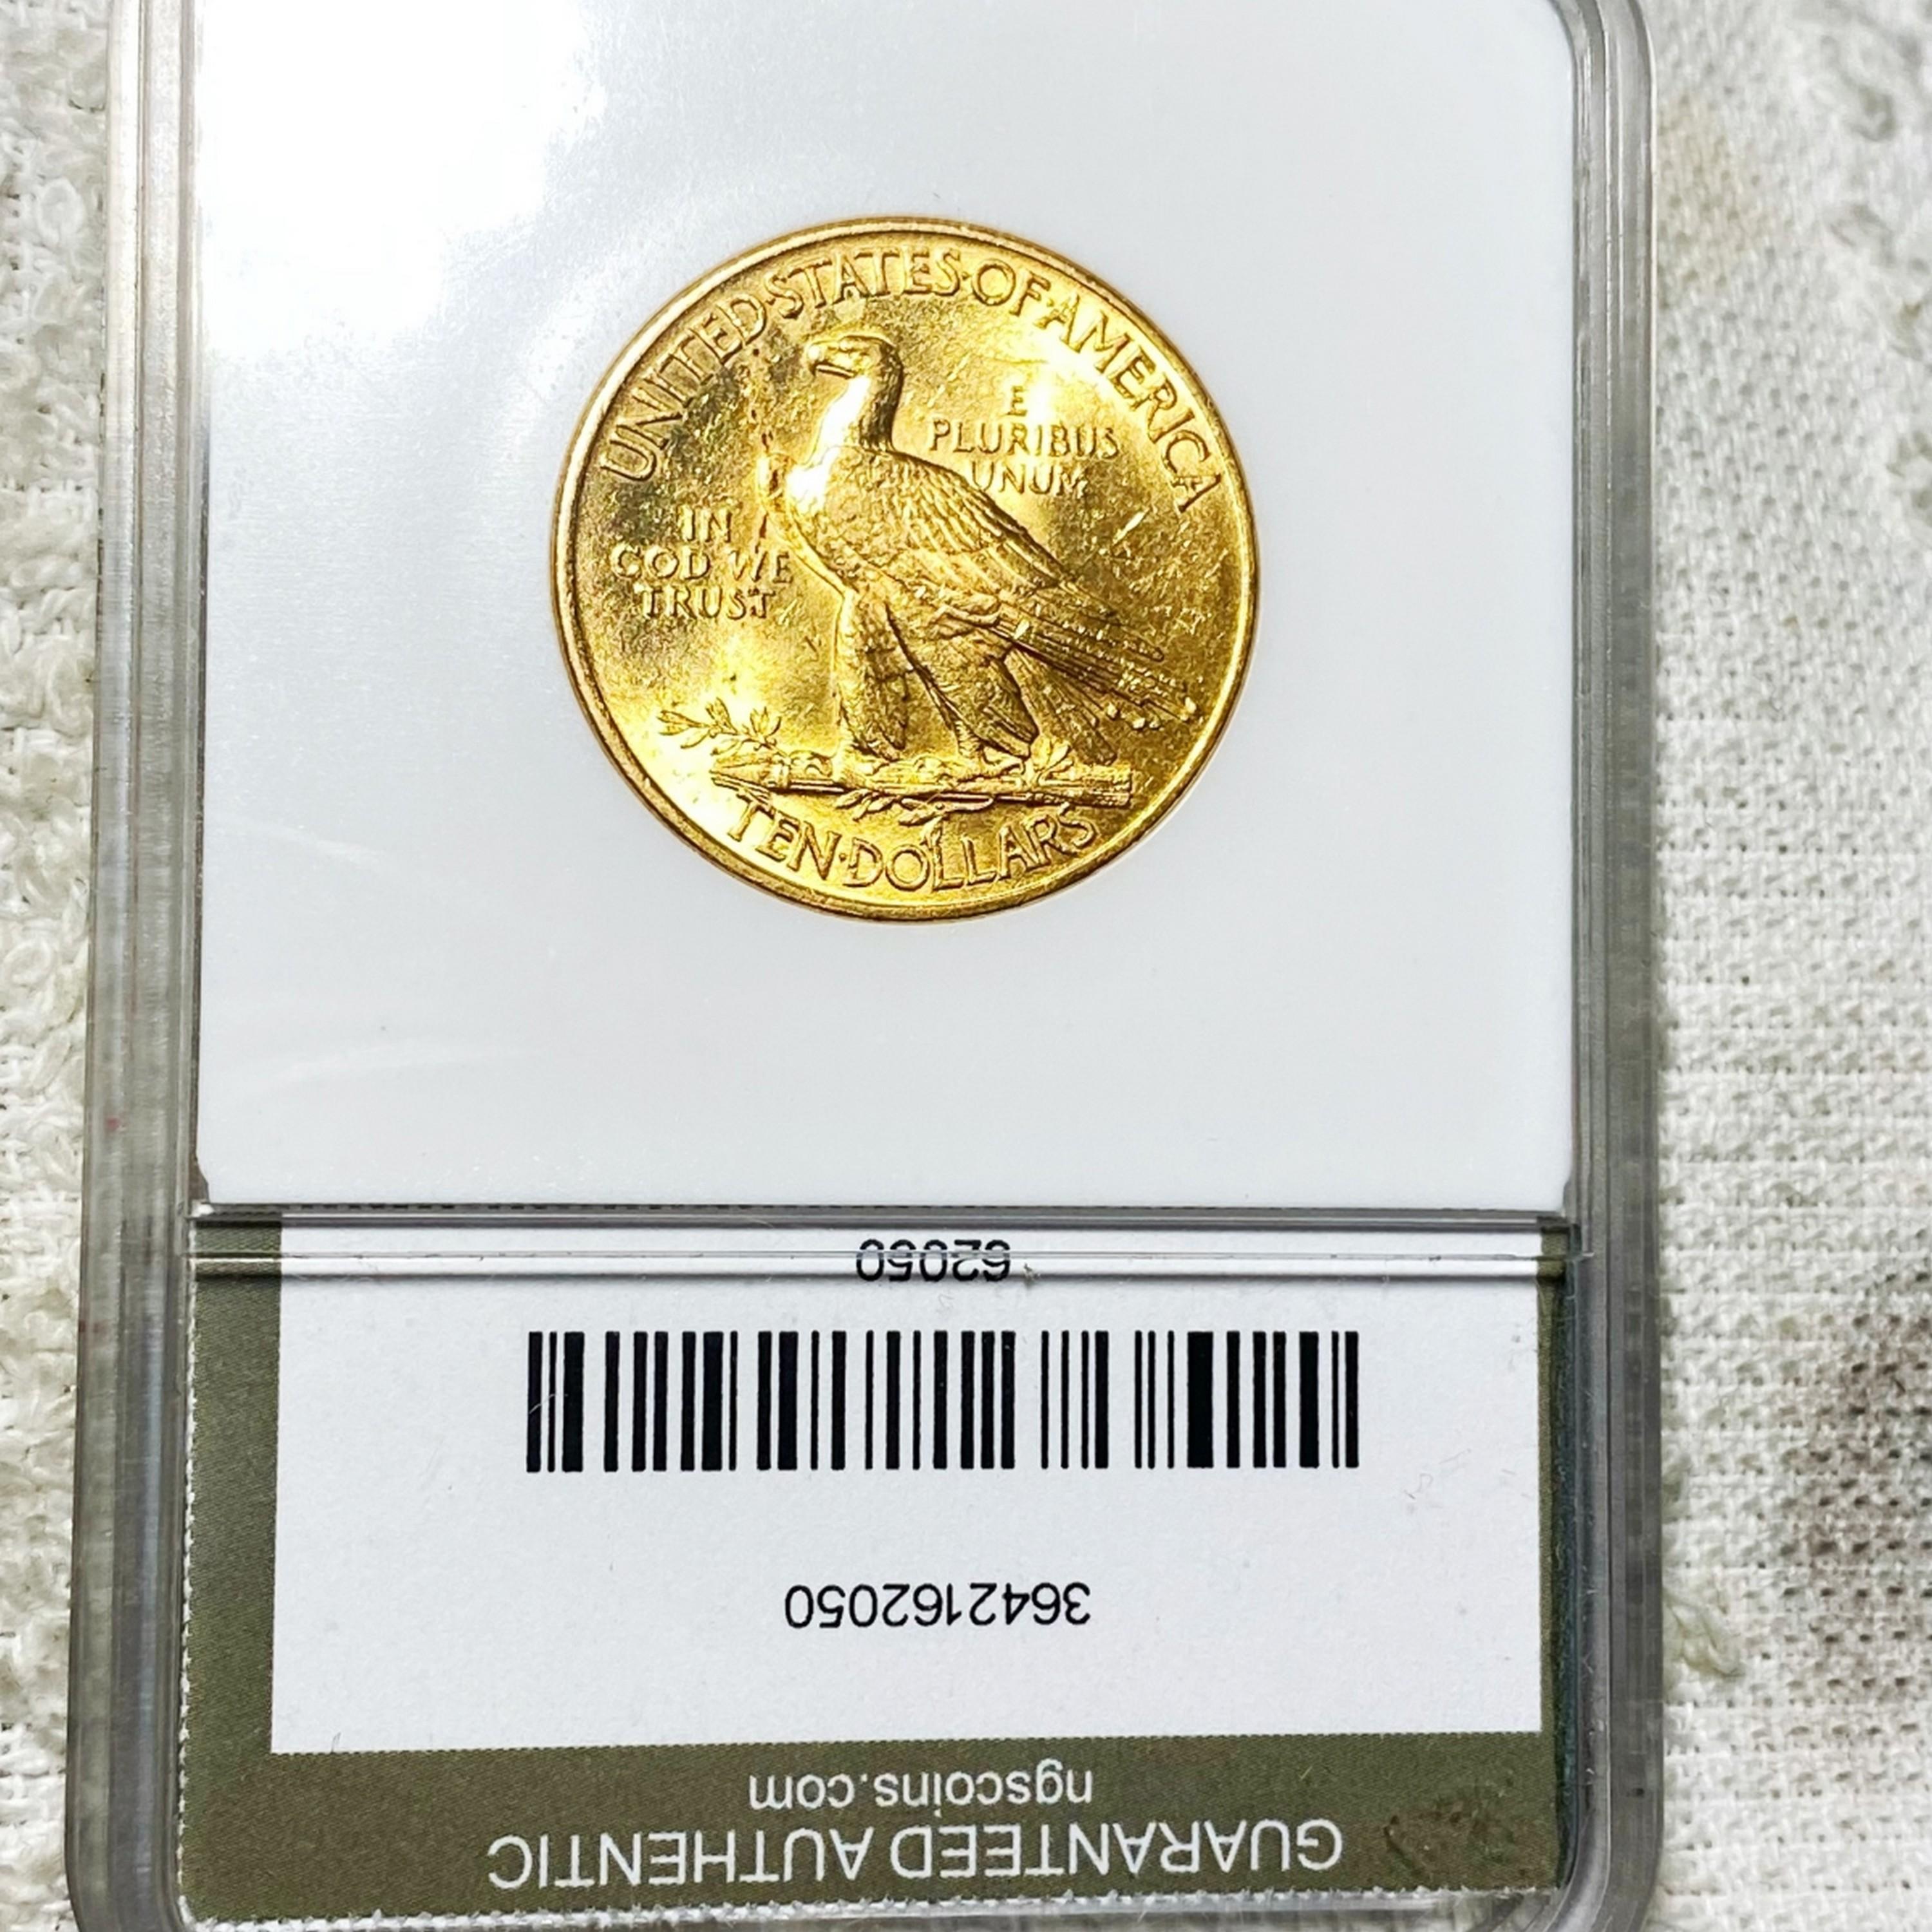 1913 $10 Gold Eagle NGS - MS66